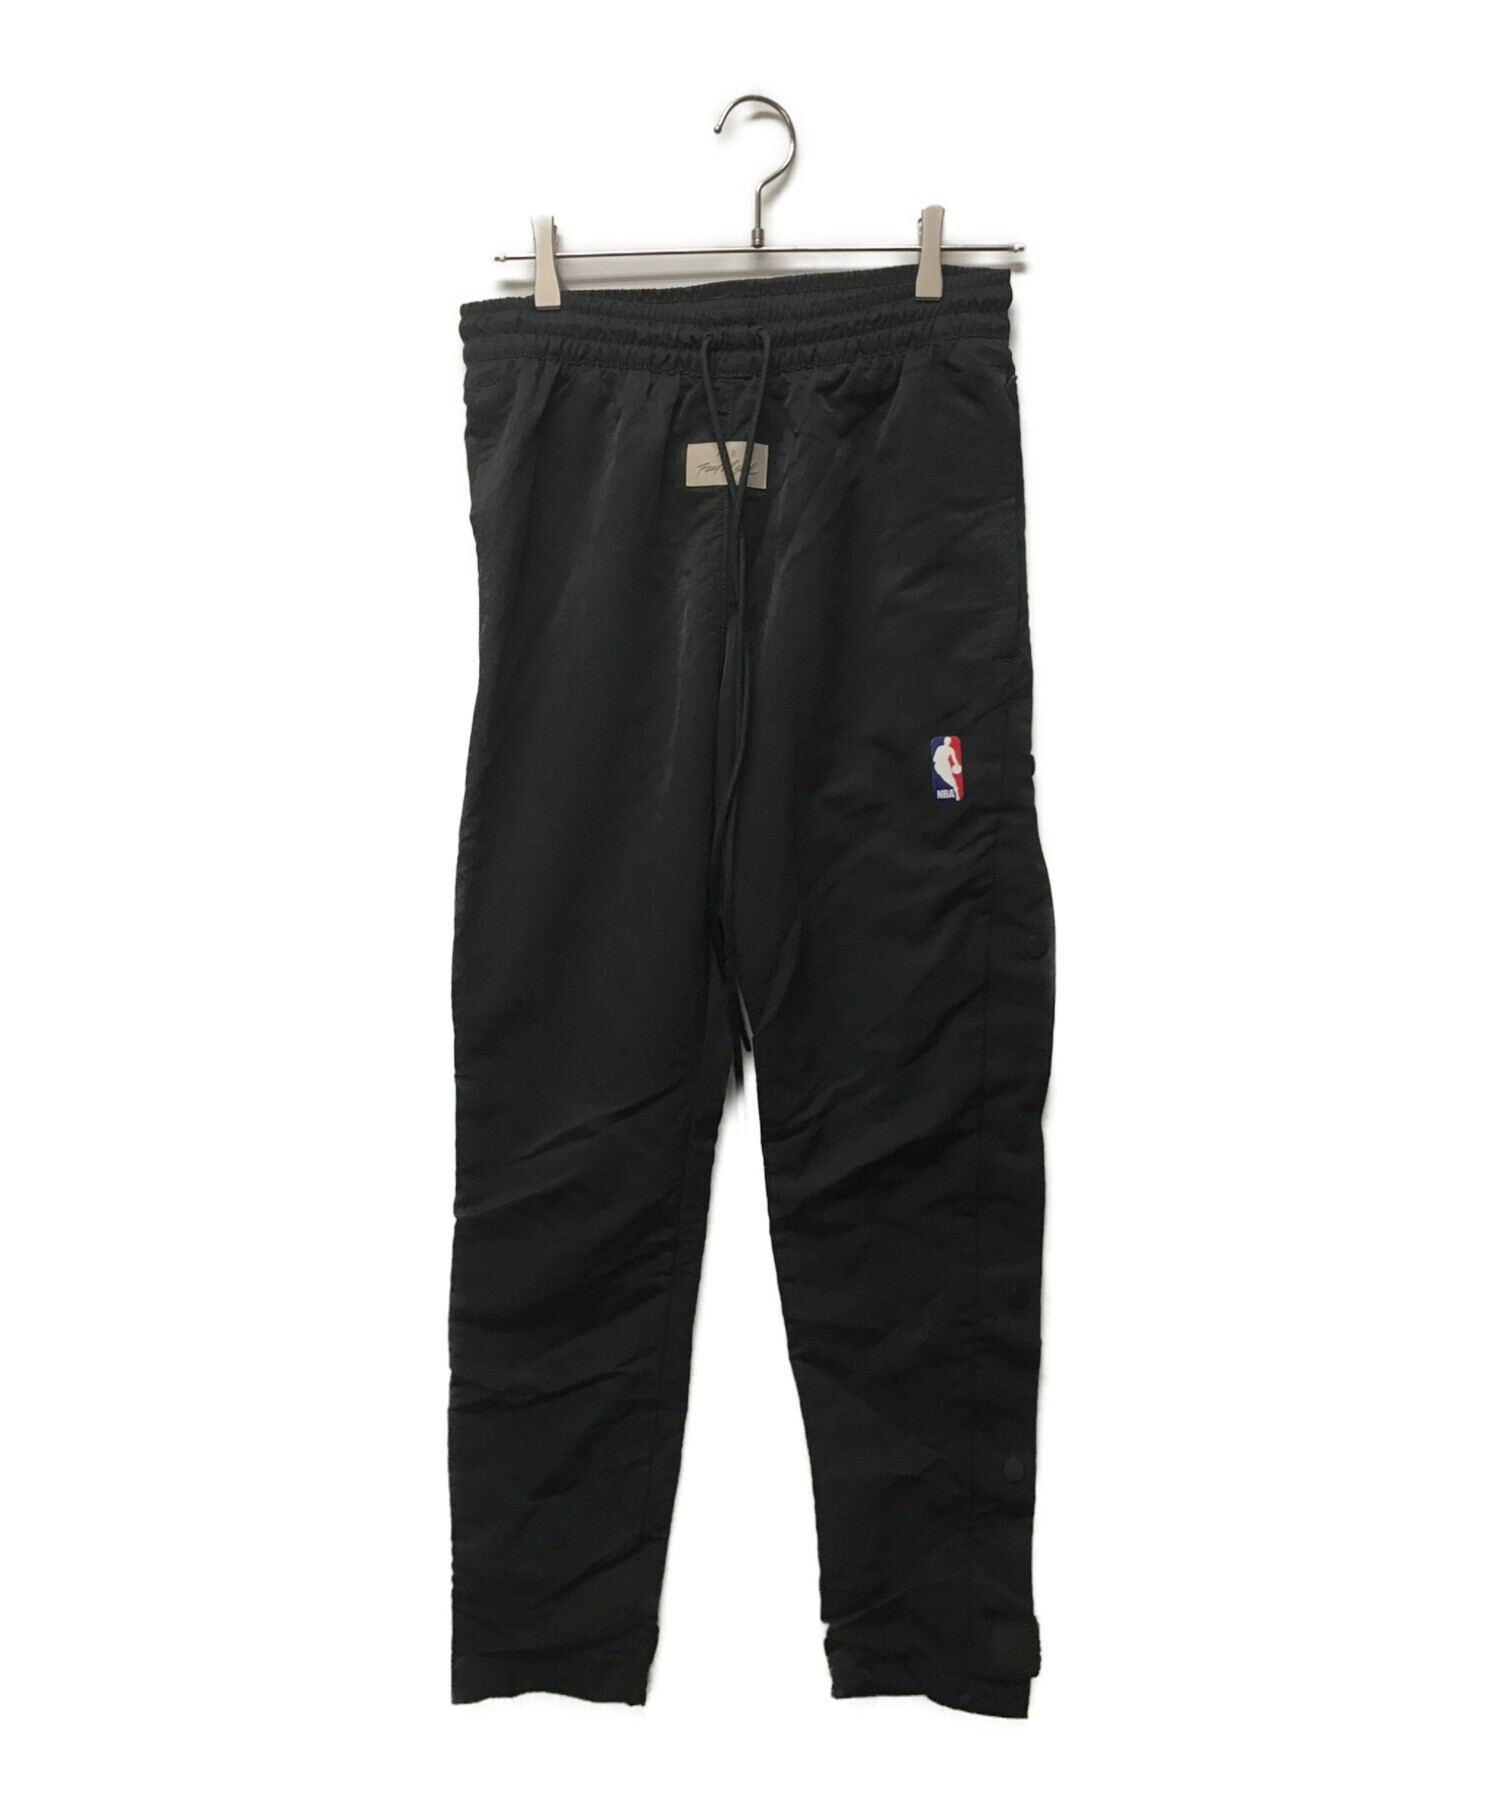 fear of god nike warm up pants パンツその他